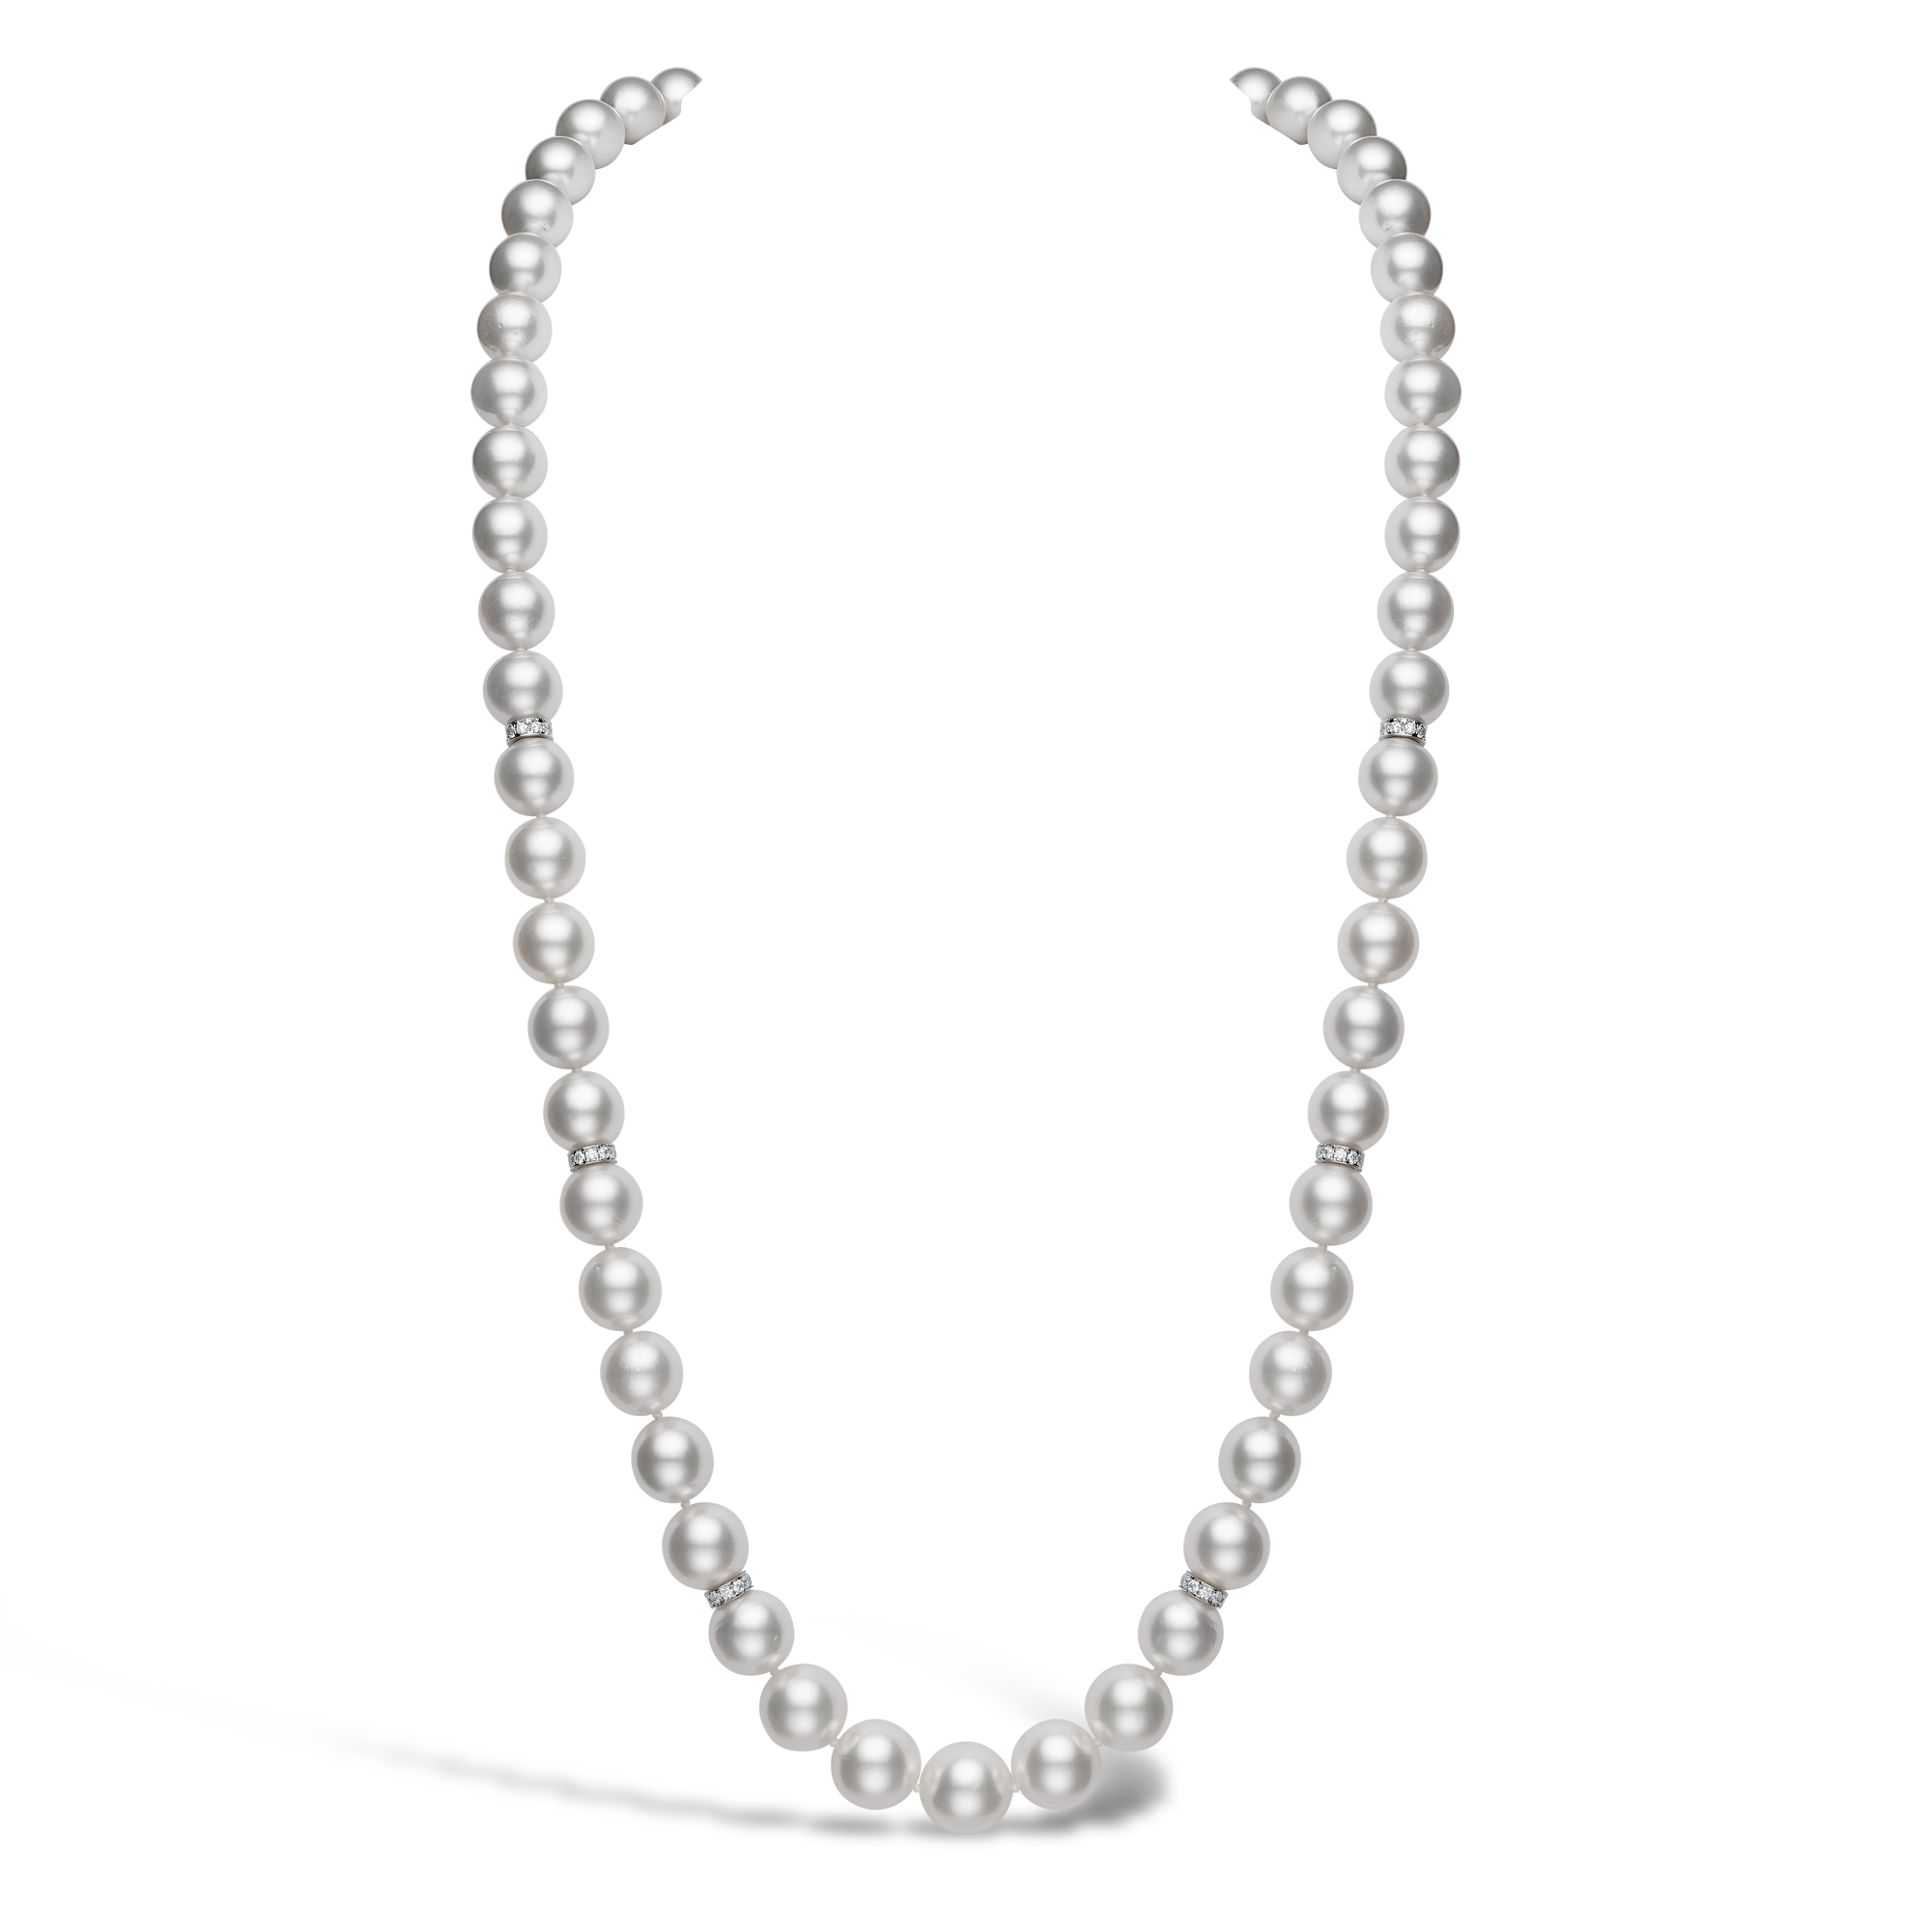 South Sea Pearl Necklace with Six Rondell Brillaint Cut Diamond Spacers 11.2mm-14.2mm_1